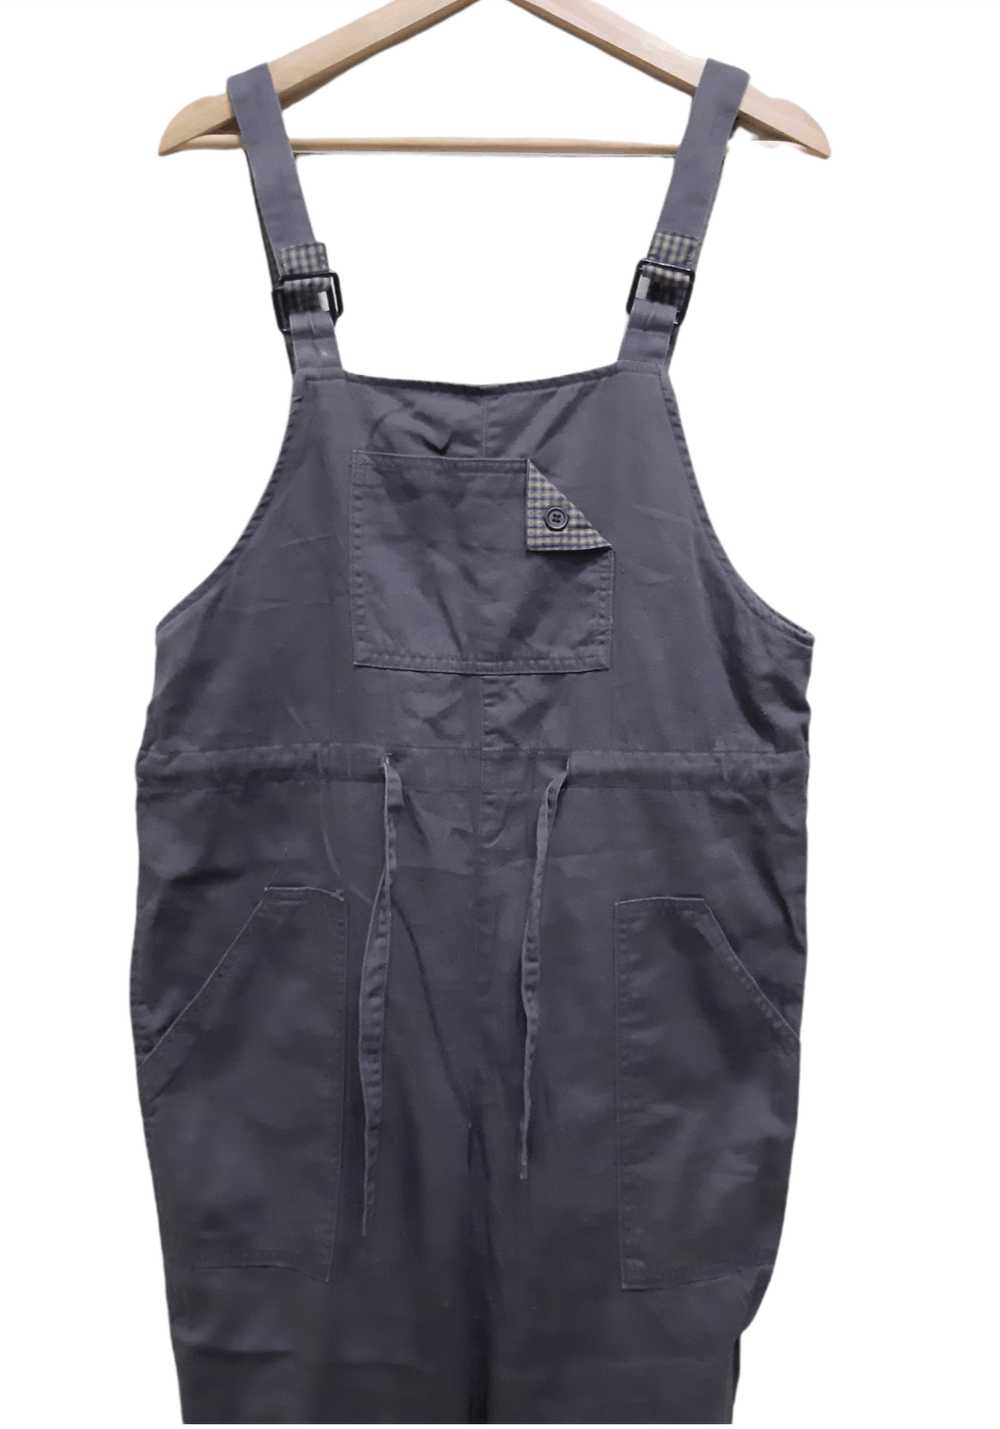 Japanese Brand × Overalls Vintage Overall Japan - image 7